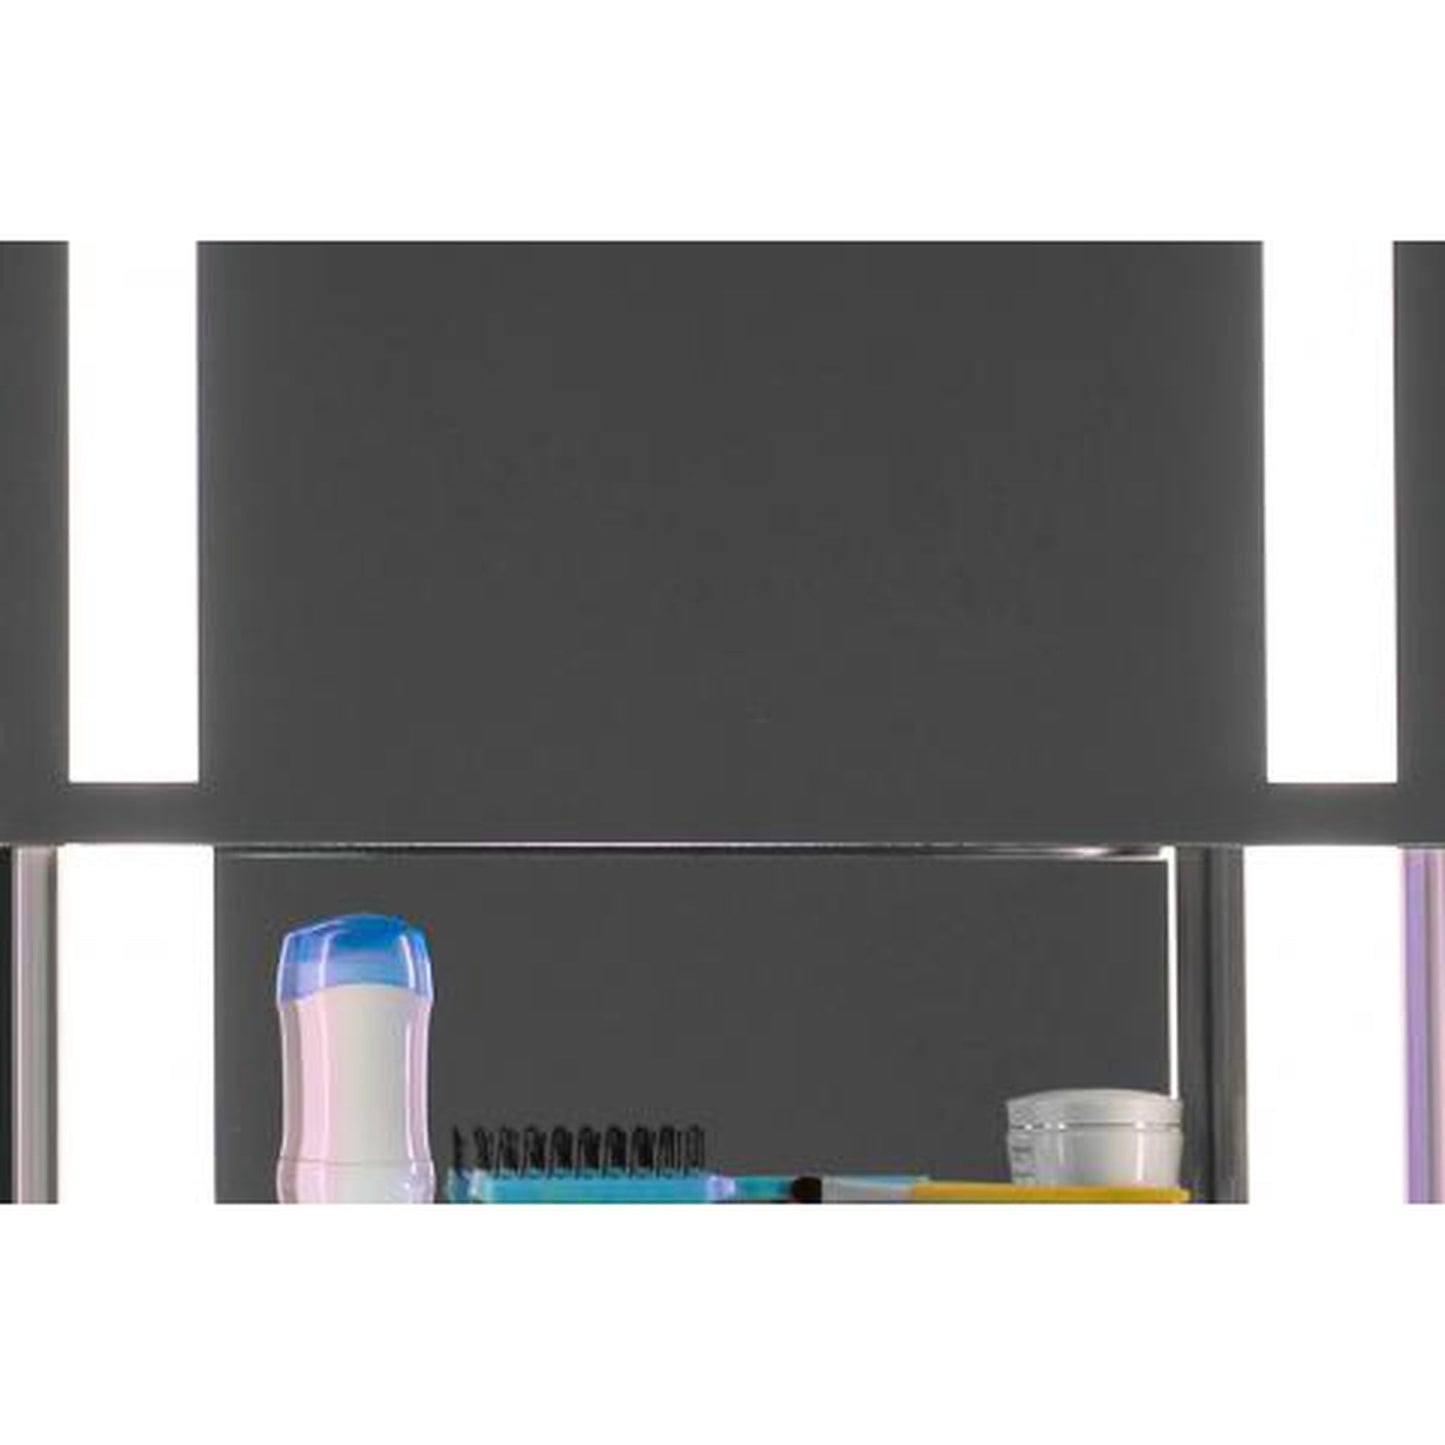 Sidler SideLight 35" x 29" 3000K Single Gliding Mirror Door Anodized Aluminum Medicine Cabinet With Built-in GFCI Outlet and USB port